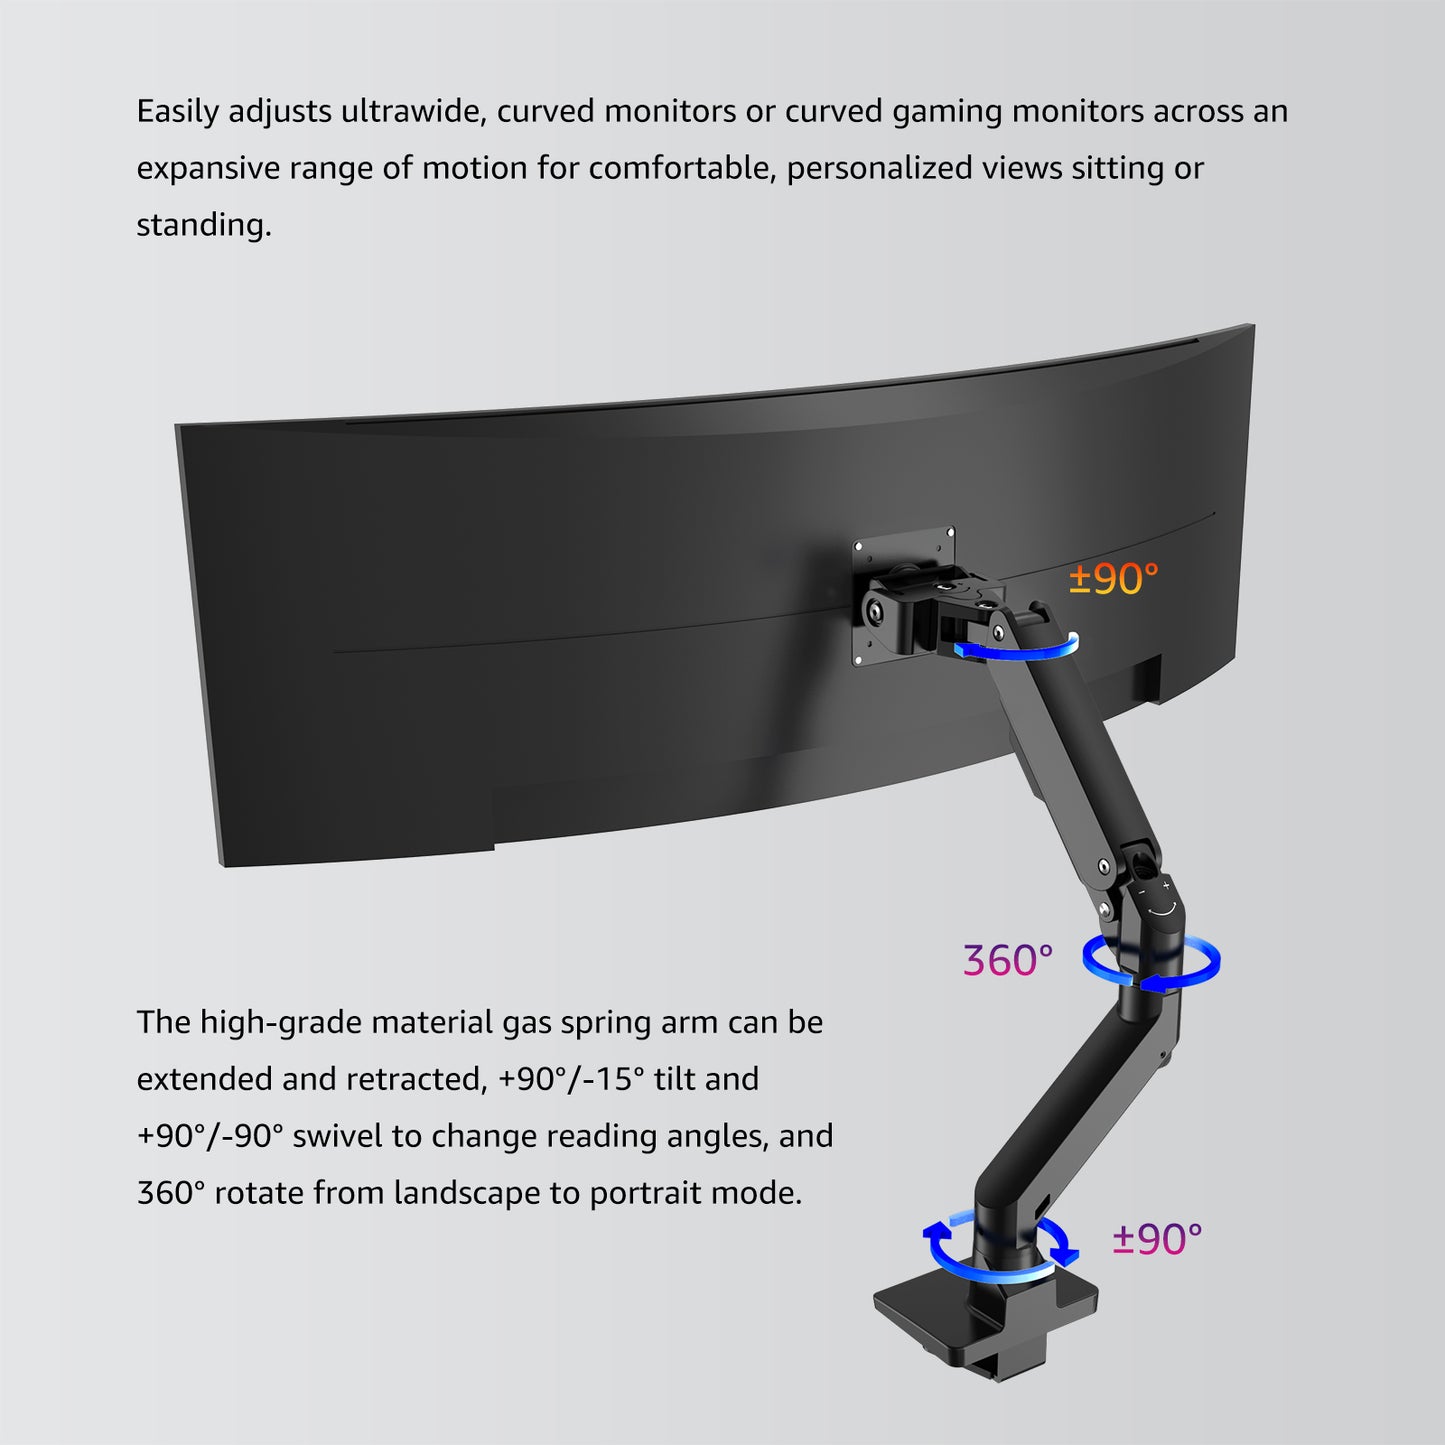 Single Ultrawide Monitor Arm , VESA Desk Mount – For 1000R Curved Monitors Up to 49 Inches, up to 44 lbs